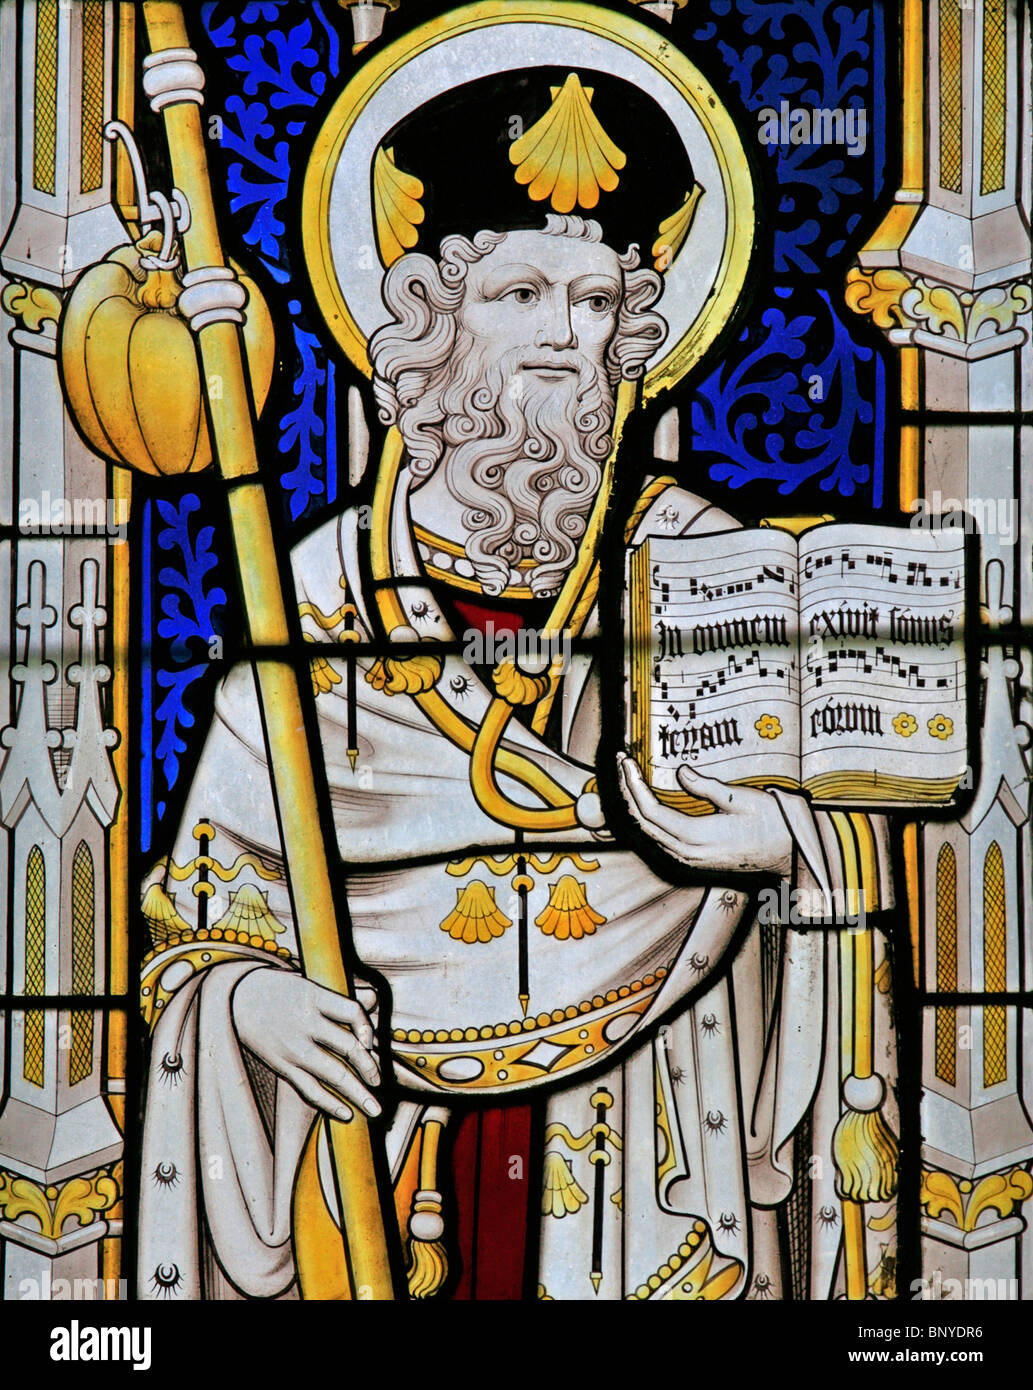 A stained glass window by Geoffrey Webb depicting St James the Greater, Apostle, All Saints Church, Ladbroke, Warwickshire. Stock Photo